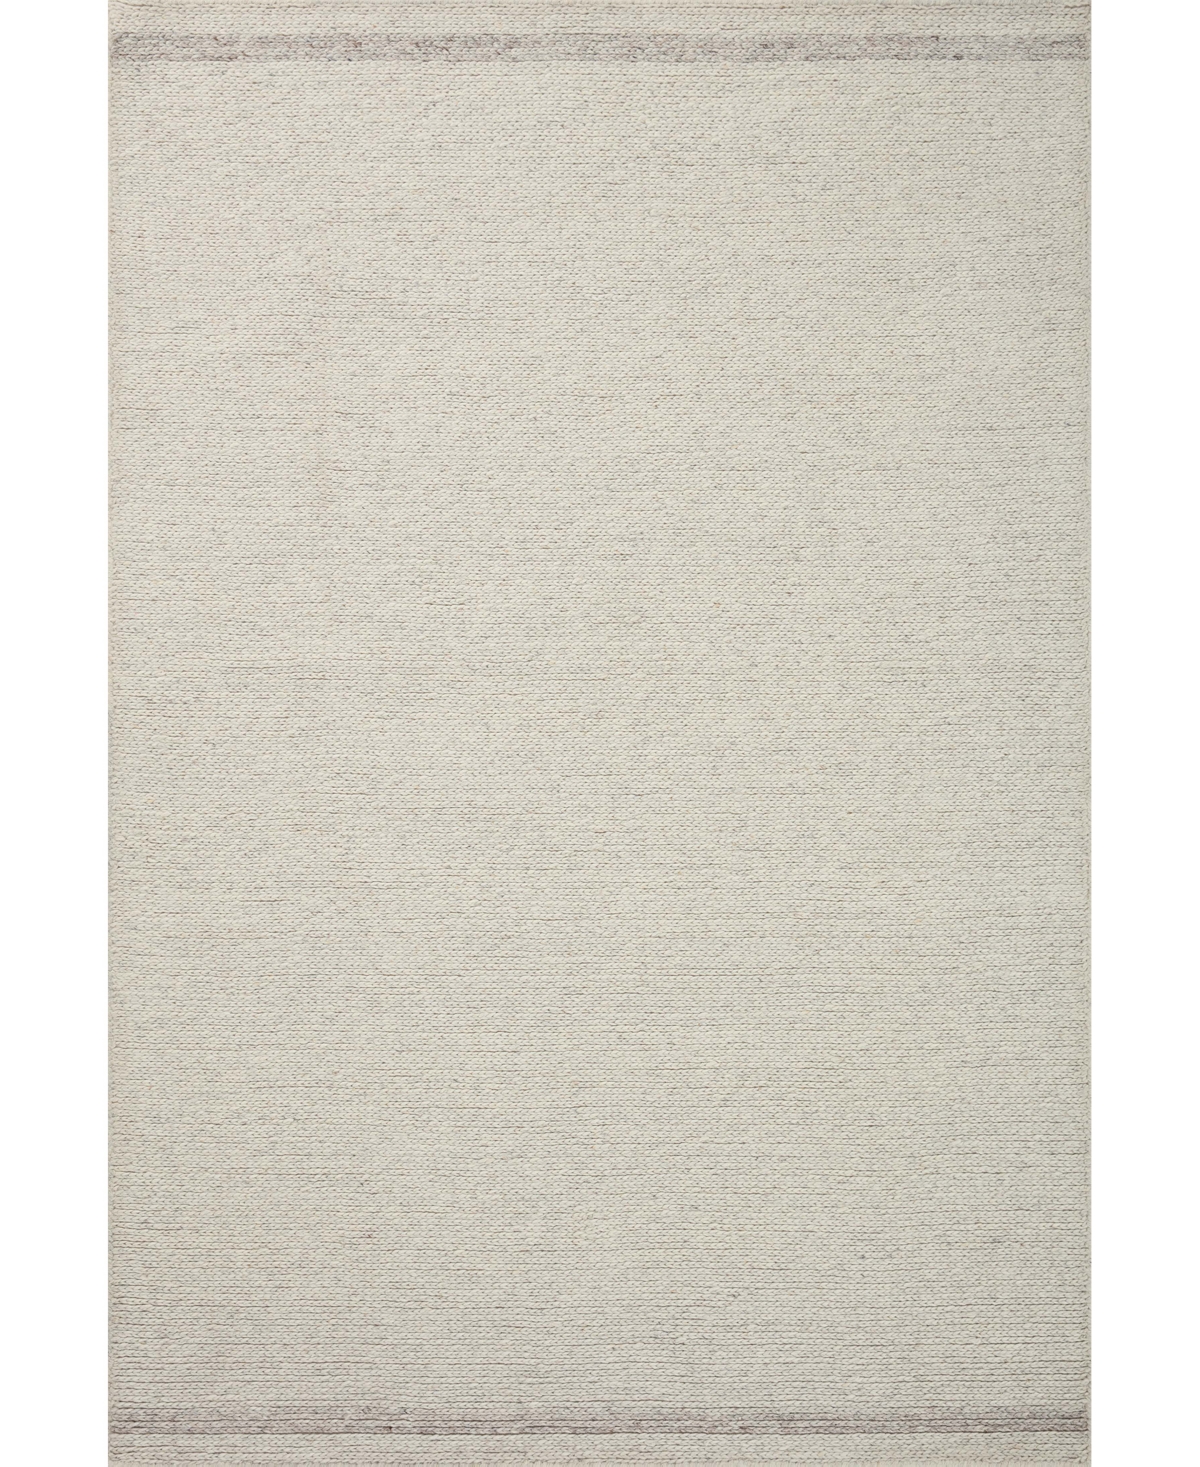 Magnolia Home By Joanna Gaines X Loloi Ashby Ash-02 8'6" X 12' Area Rug In Mist